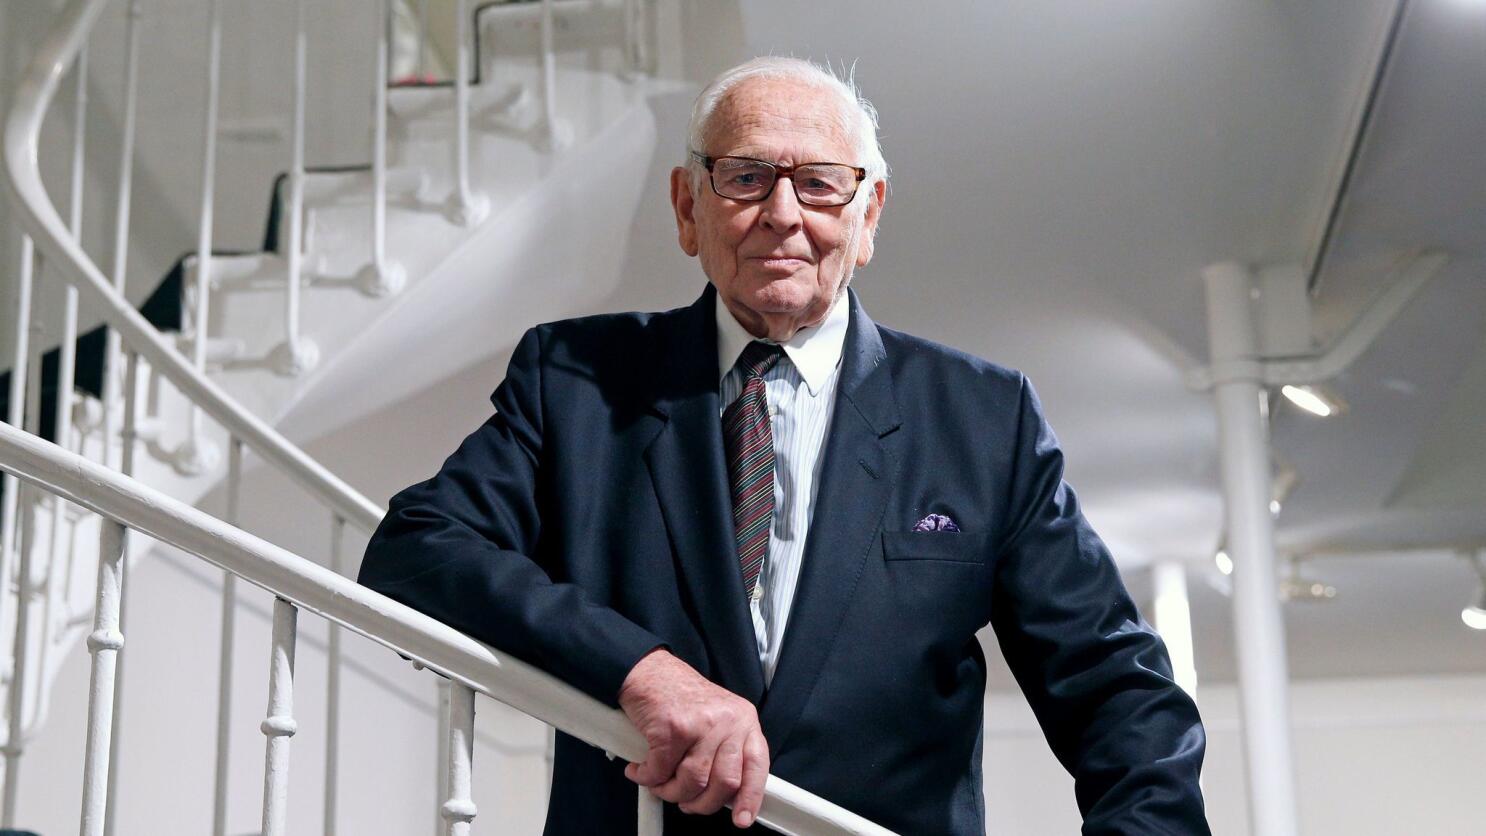 Pierre Cardin, the man who dressed the future